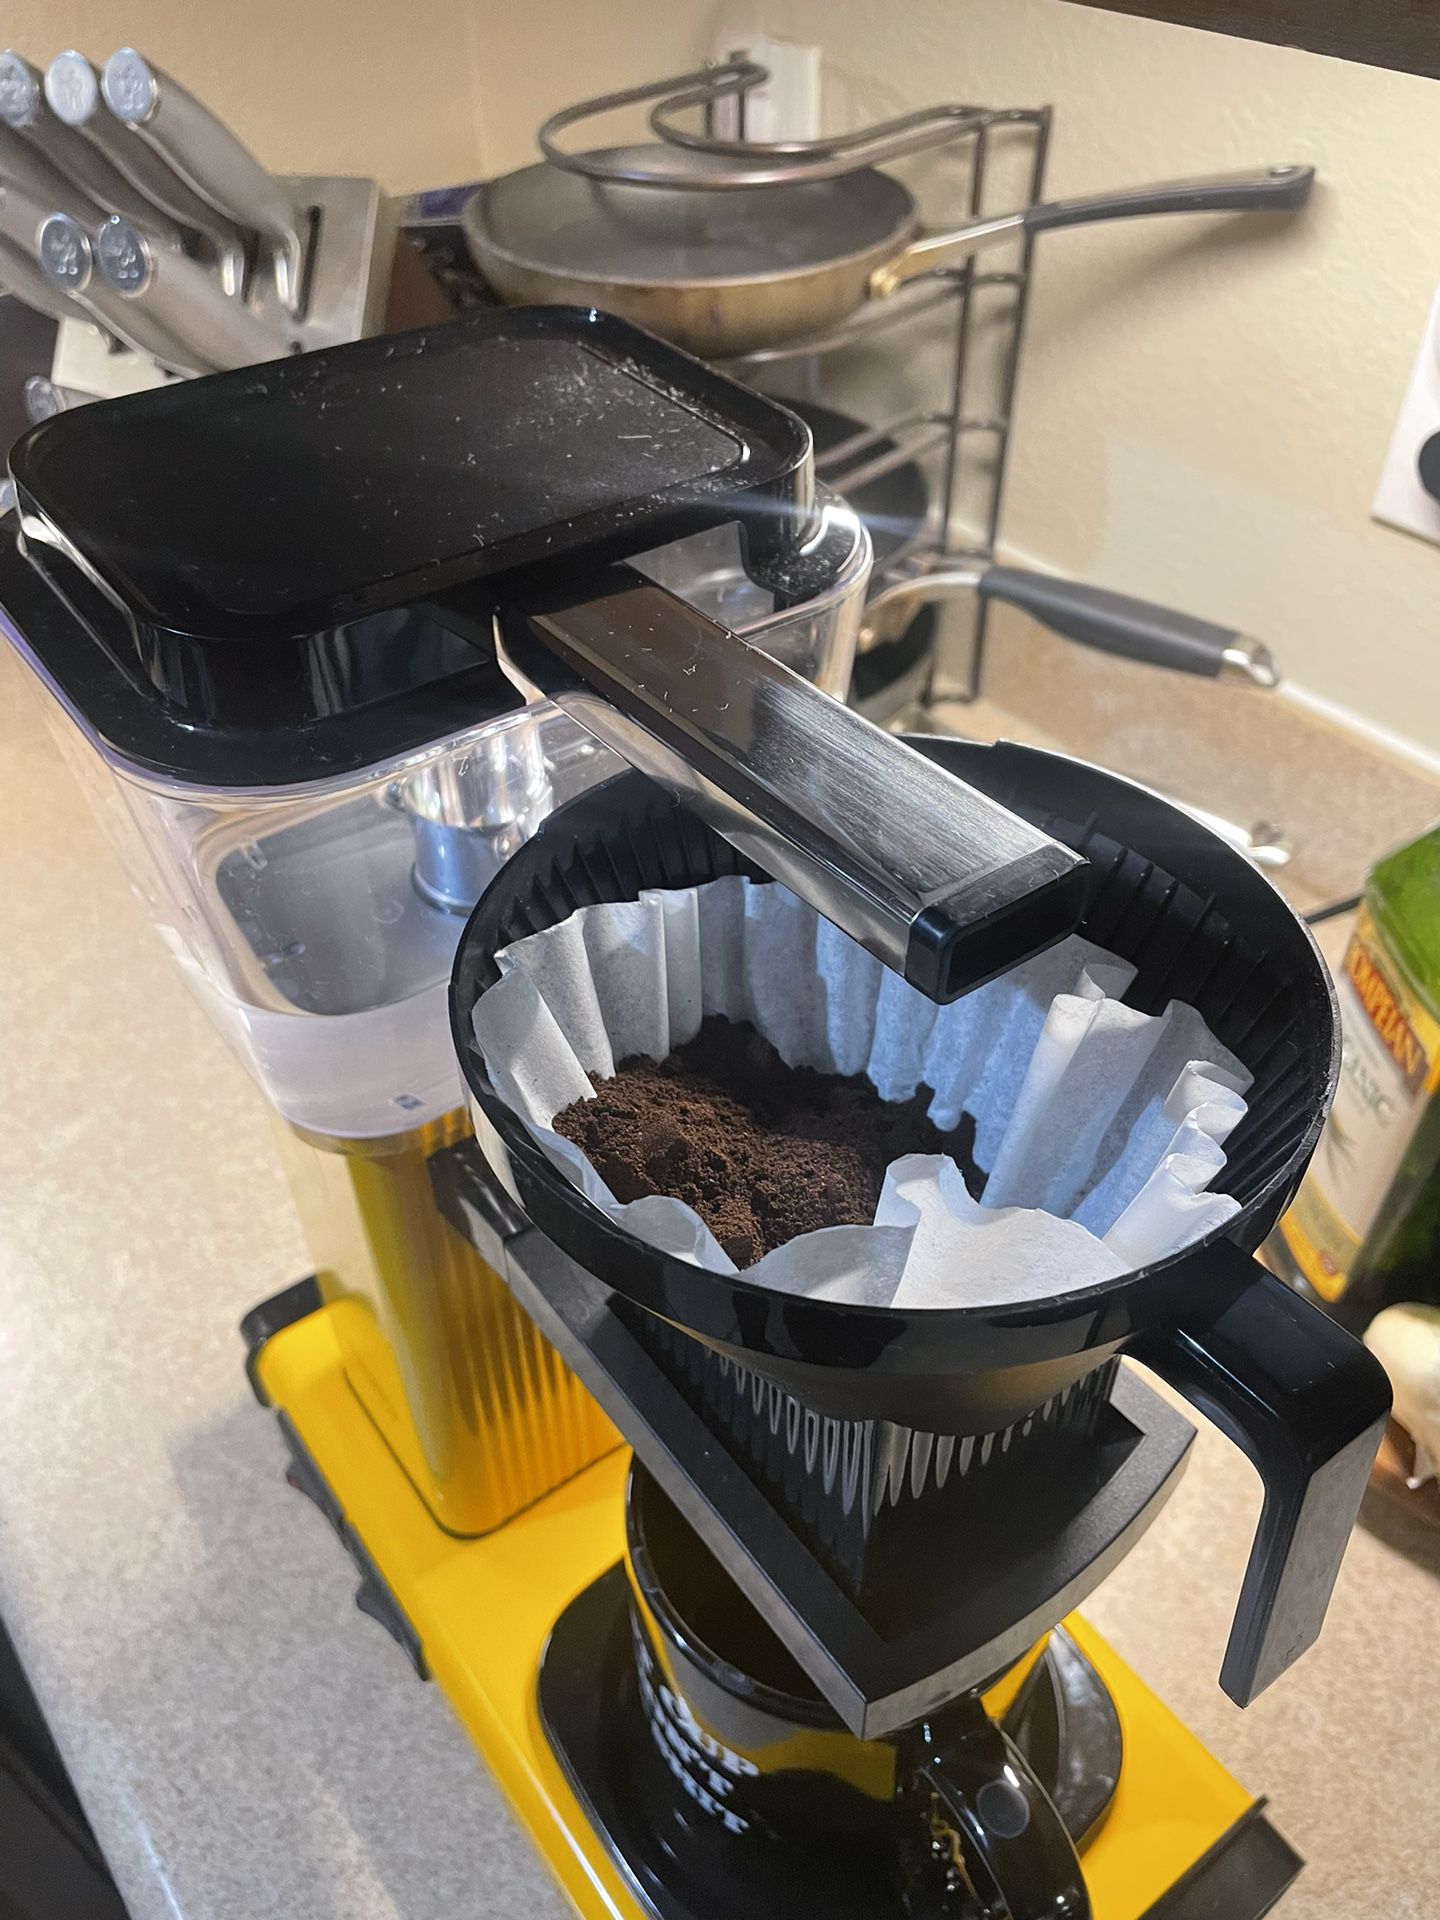 Moccamaster With Thermal Carafe for Sale in River Edge, NJ - OfferUp